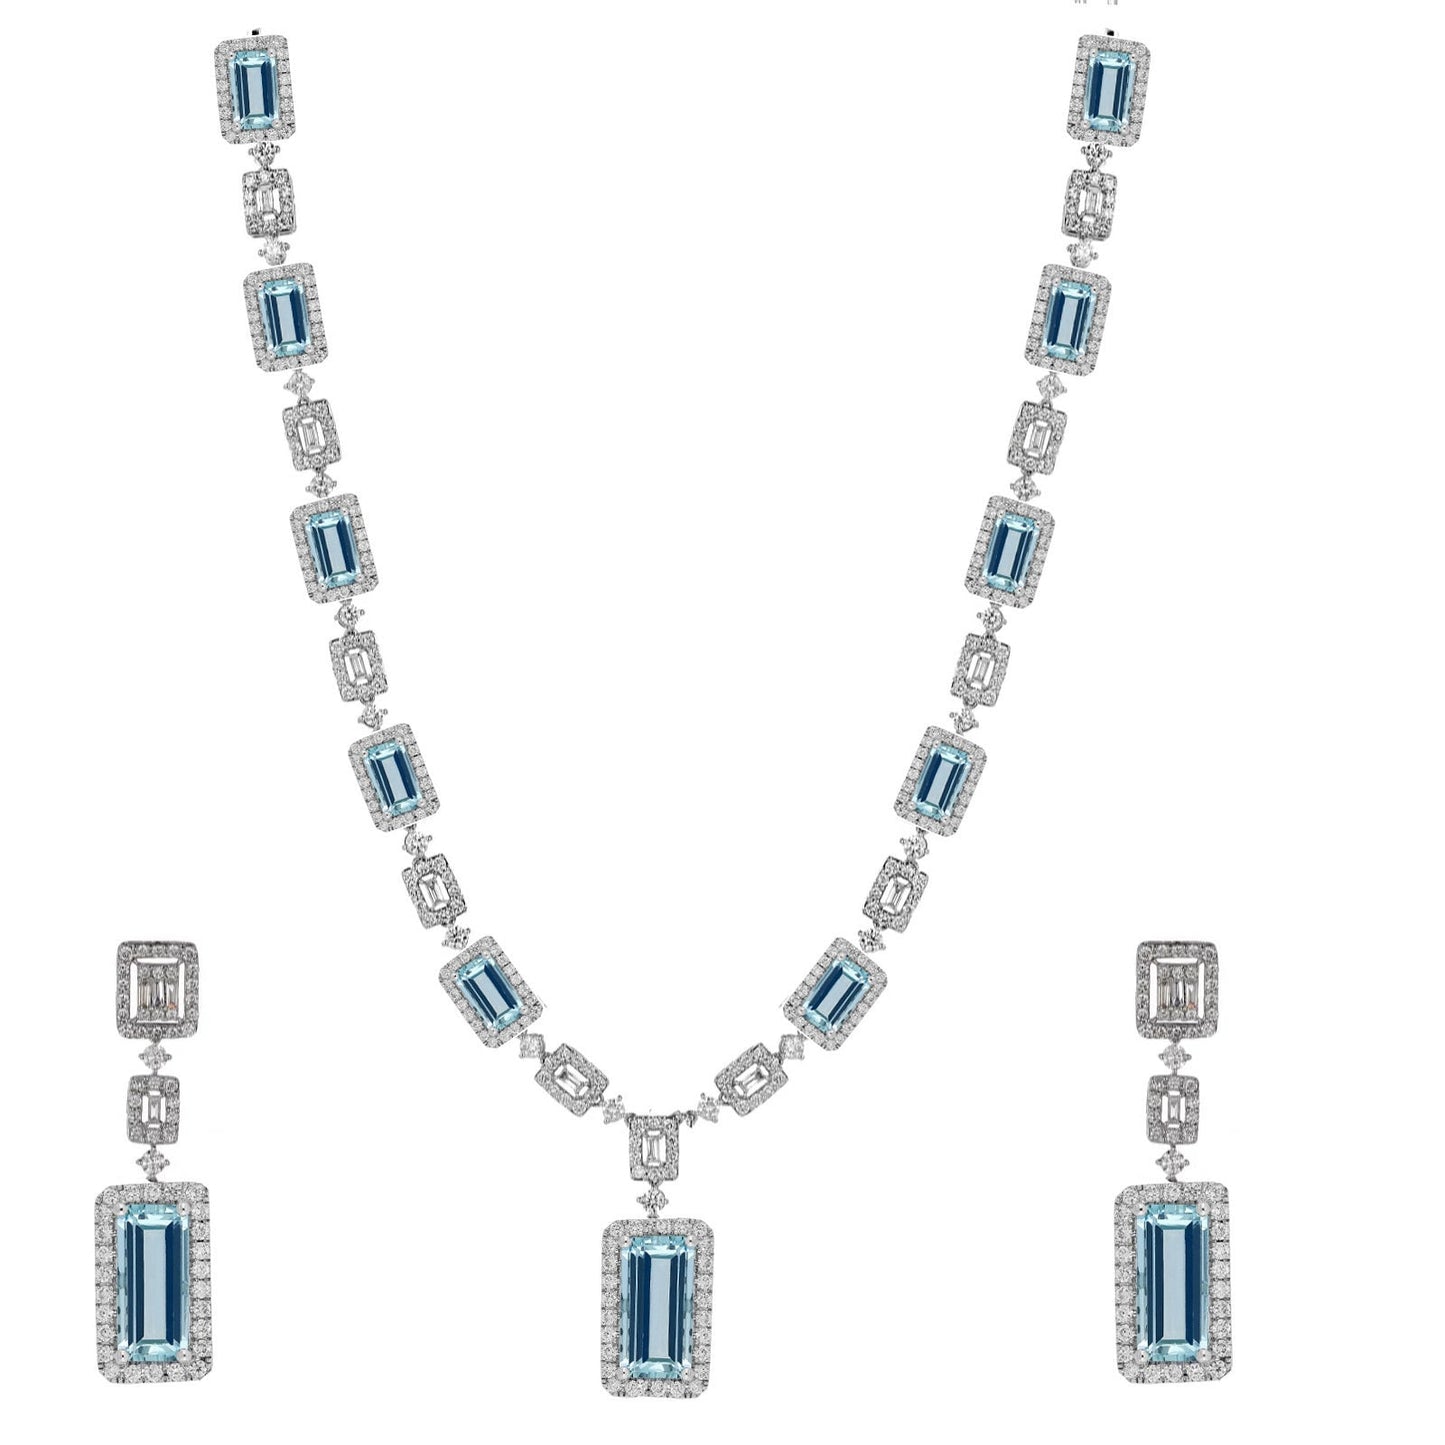 EMERALD CUT AQUAMARINE Necklace Set, Aquamarine necklace, March Birthstone, Sterling silver Necklace With Earrings Set, Wedding Necklace Set